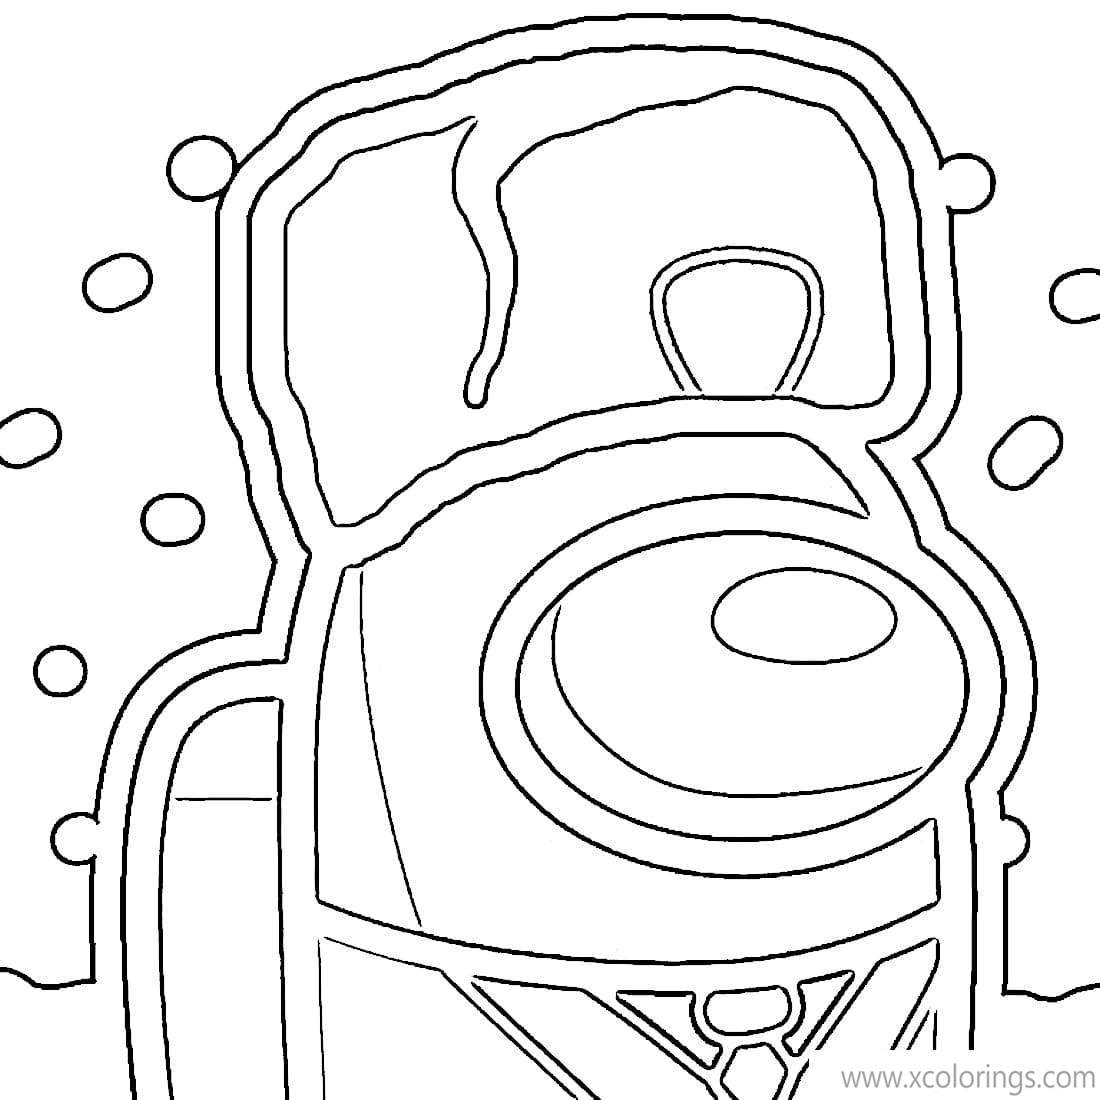 Among Us Coloring Pages Traitor In a Fur Hat - XColorings.com